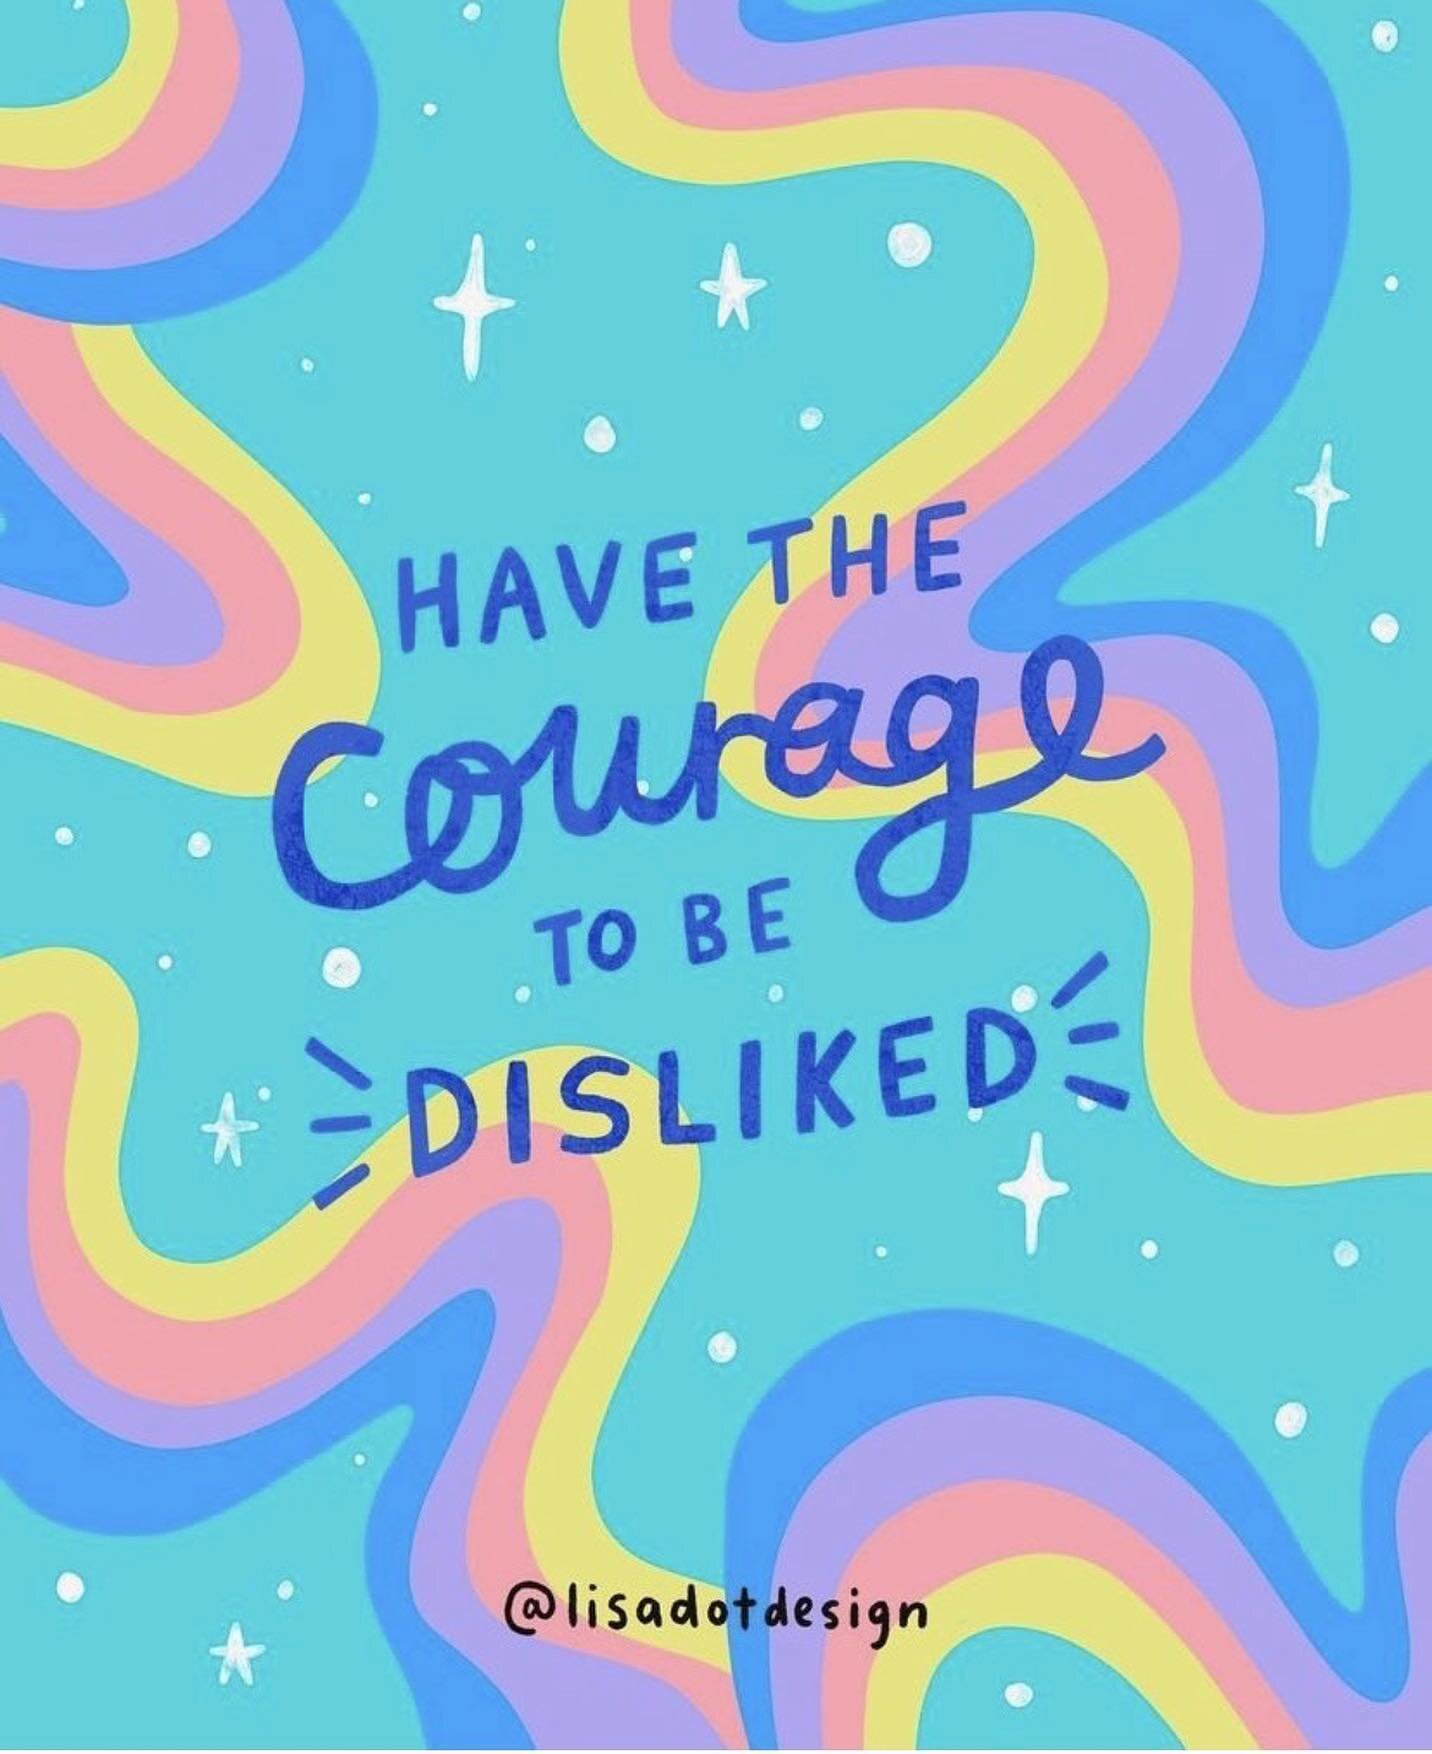 Authenticity is courageous 💜💪
#courageoussurvivors 
www.courageoussurvivors.com